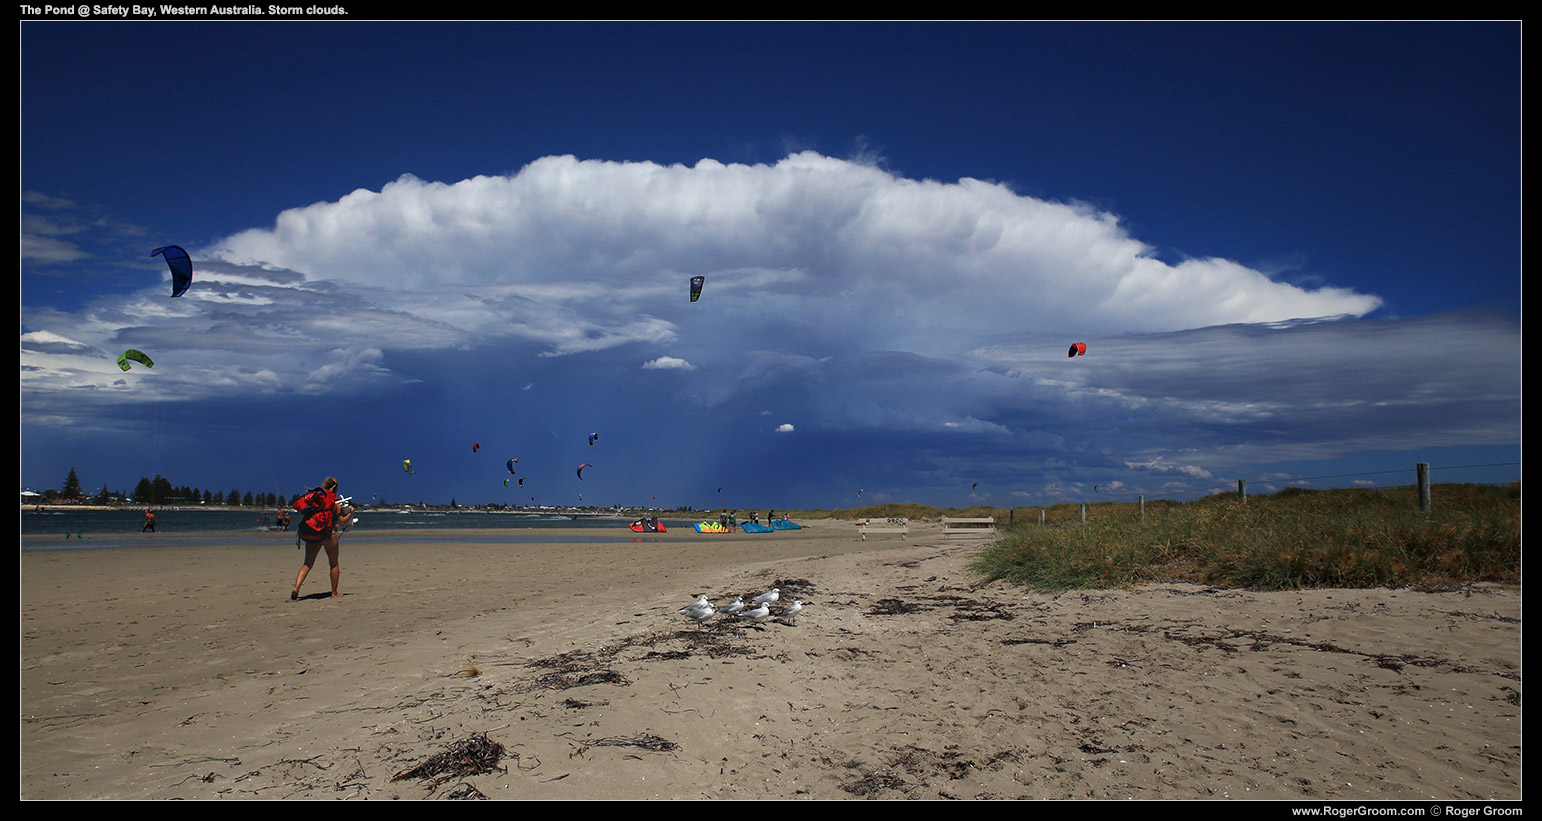 Storm clouds in the distance at The Pond @ Safety Bay, Western Australia. Kite Surfers abound!